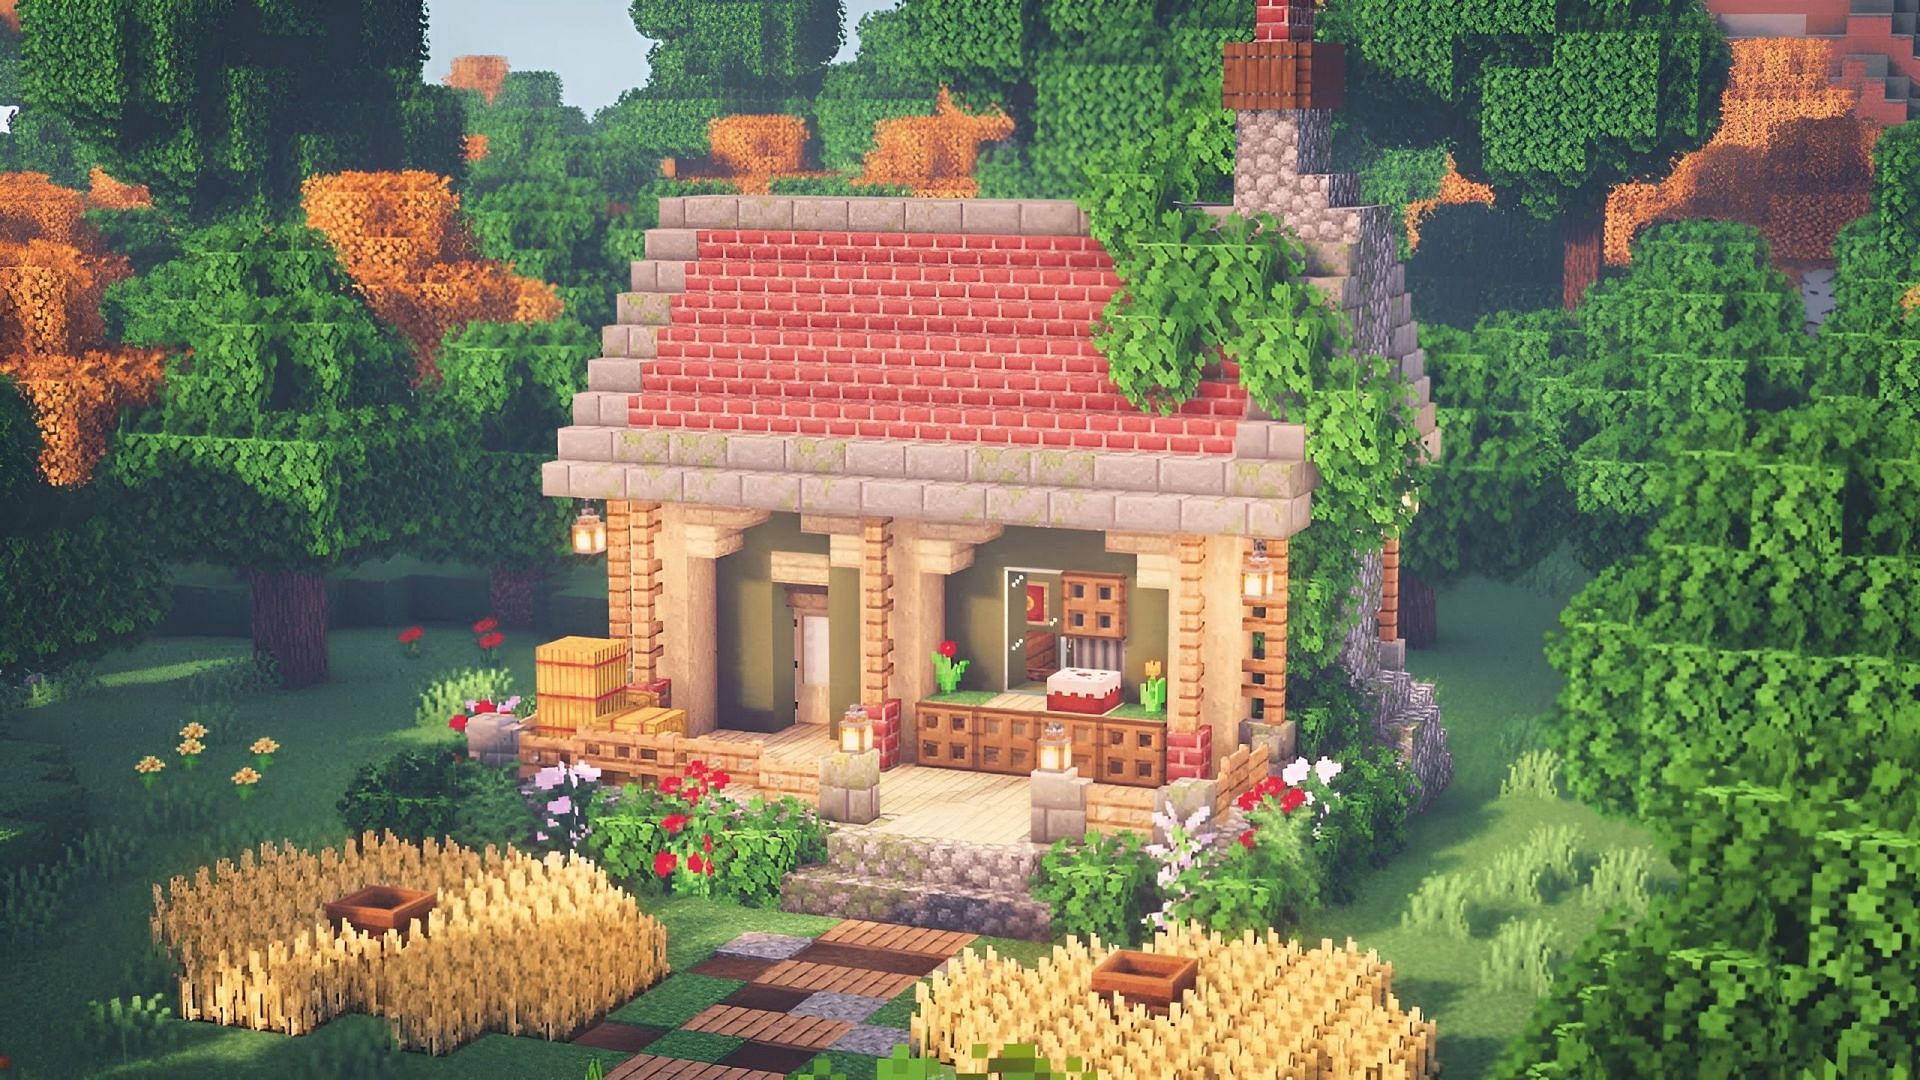 Cottage builds in Minecraft are so cute (Image via Youtube/Zaypixel)